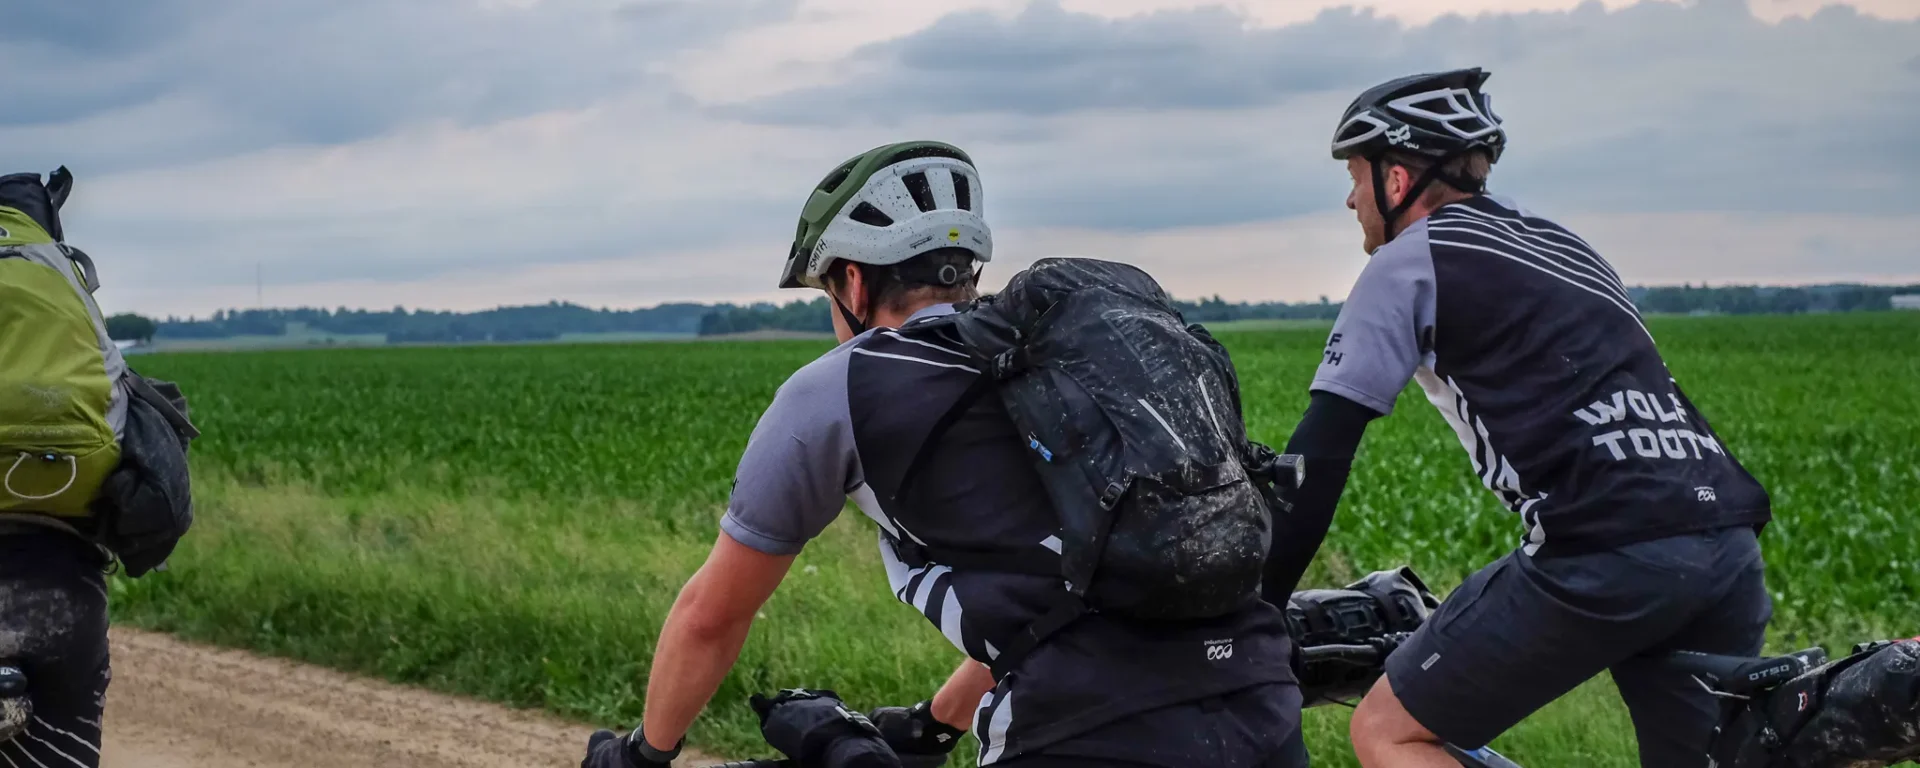 A group of cyclists riding their bikes. They are on a bikepacking trip in Minnesota. It has recently rained, so the landscape (and cyclists) appear to be damp.